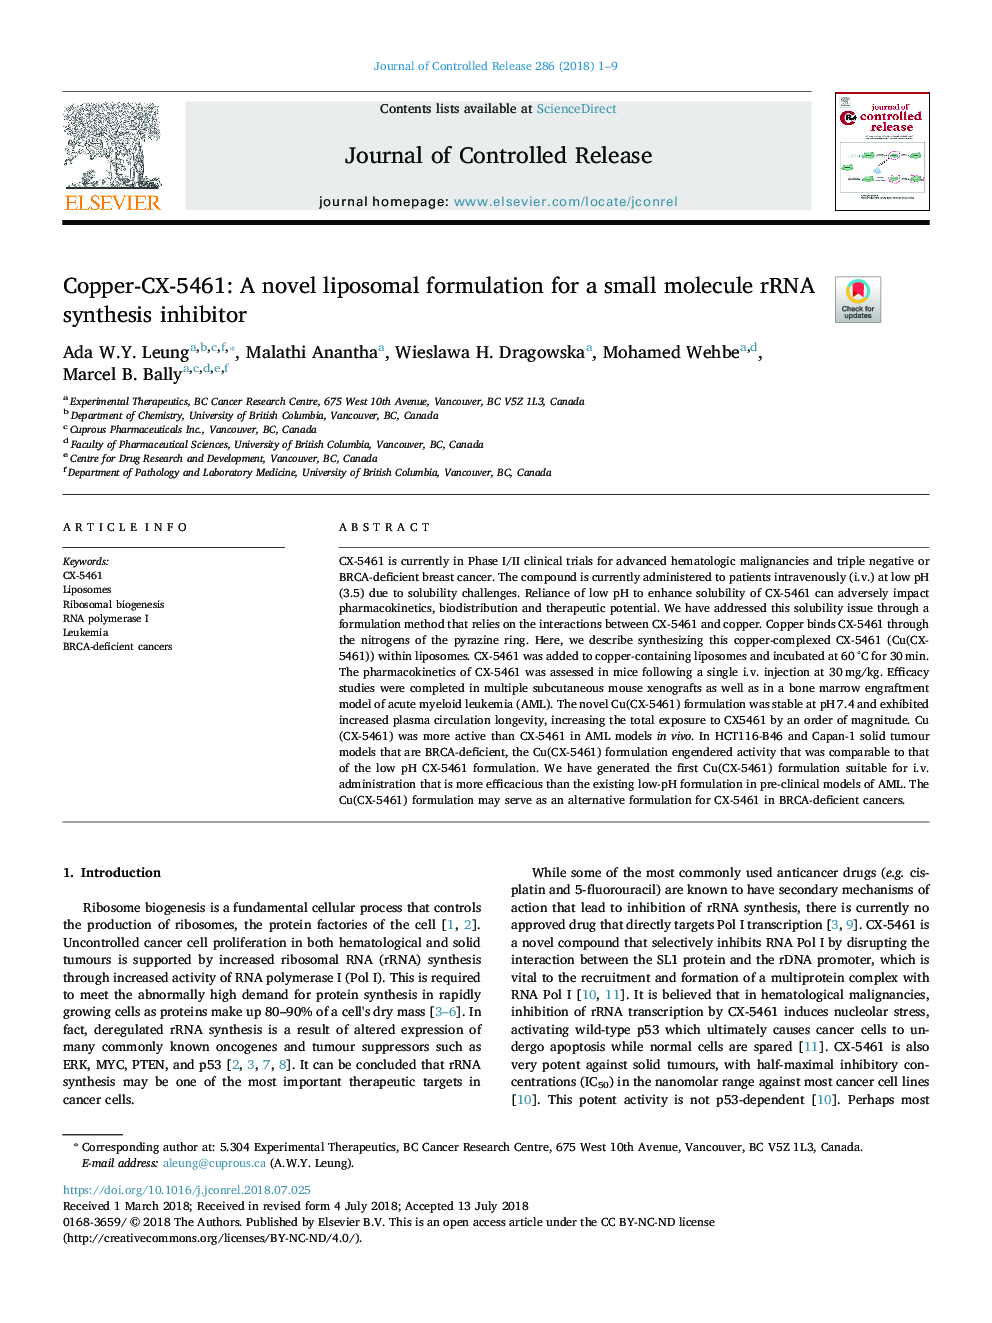 Copper-CX-5461: A novel liposomal formulation for a small molecule rRNA synthesis inhibitor